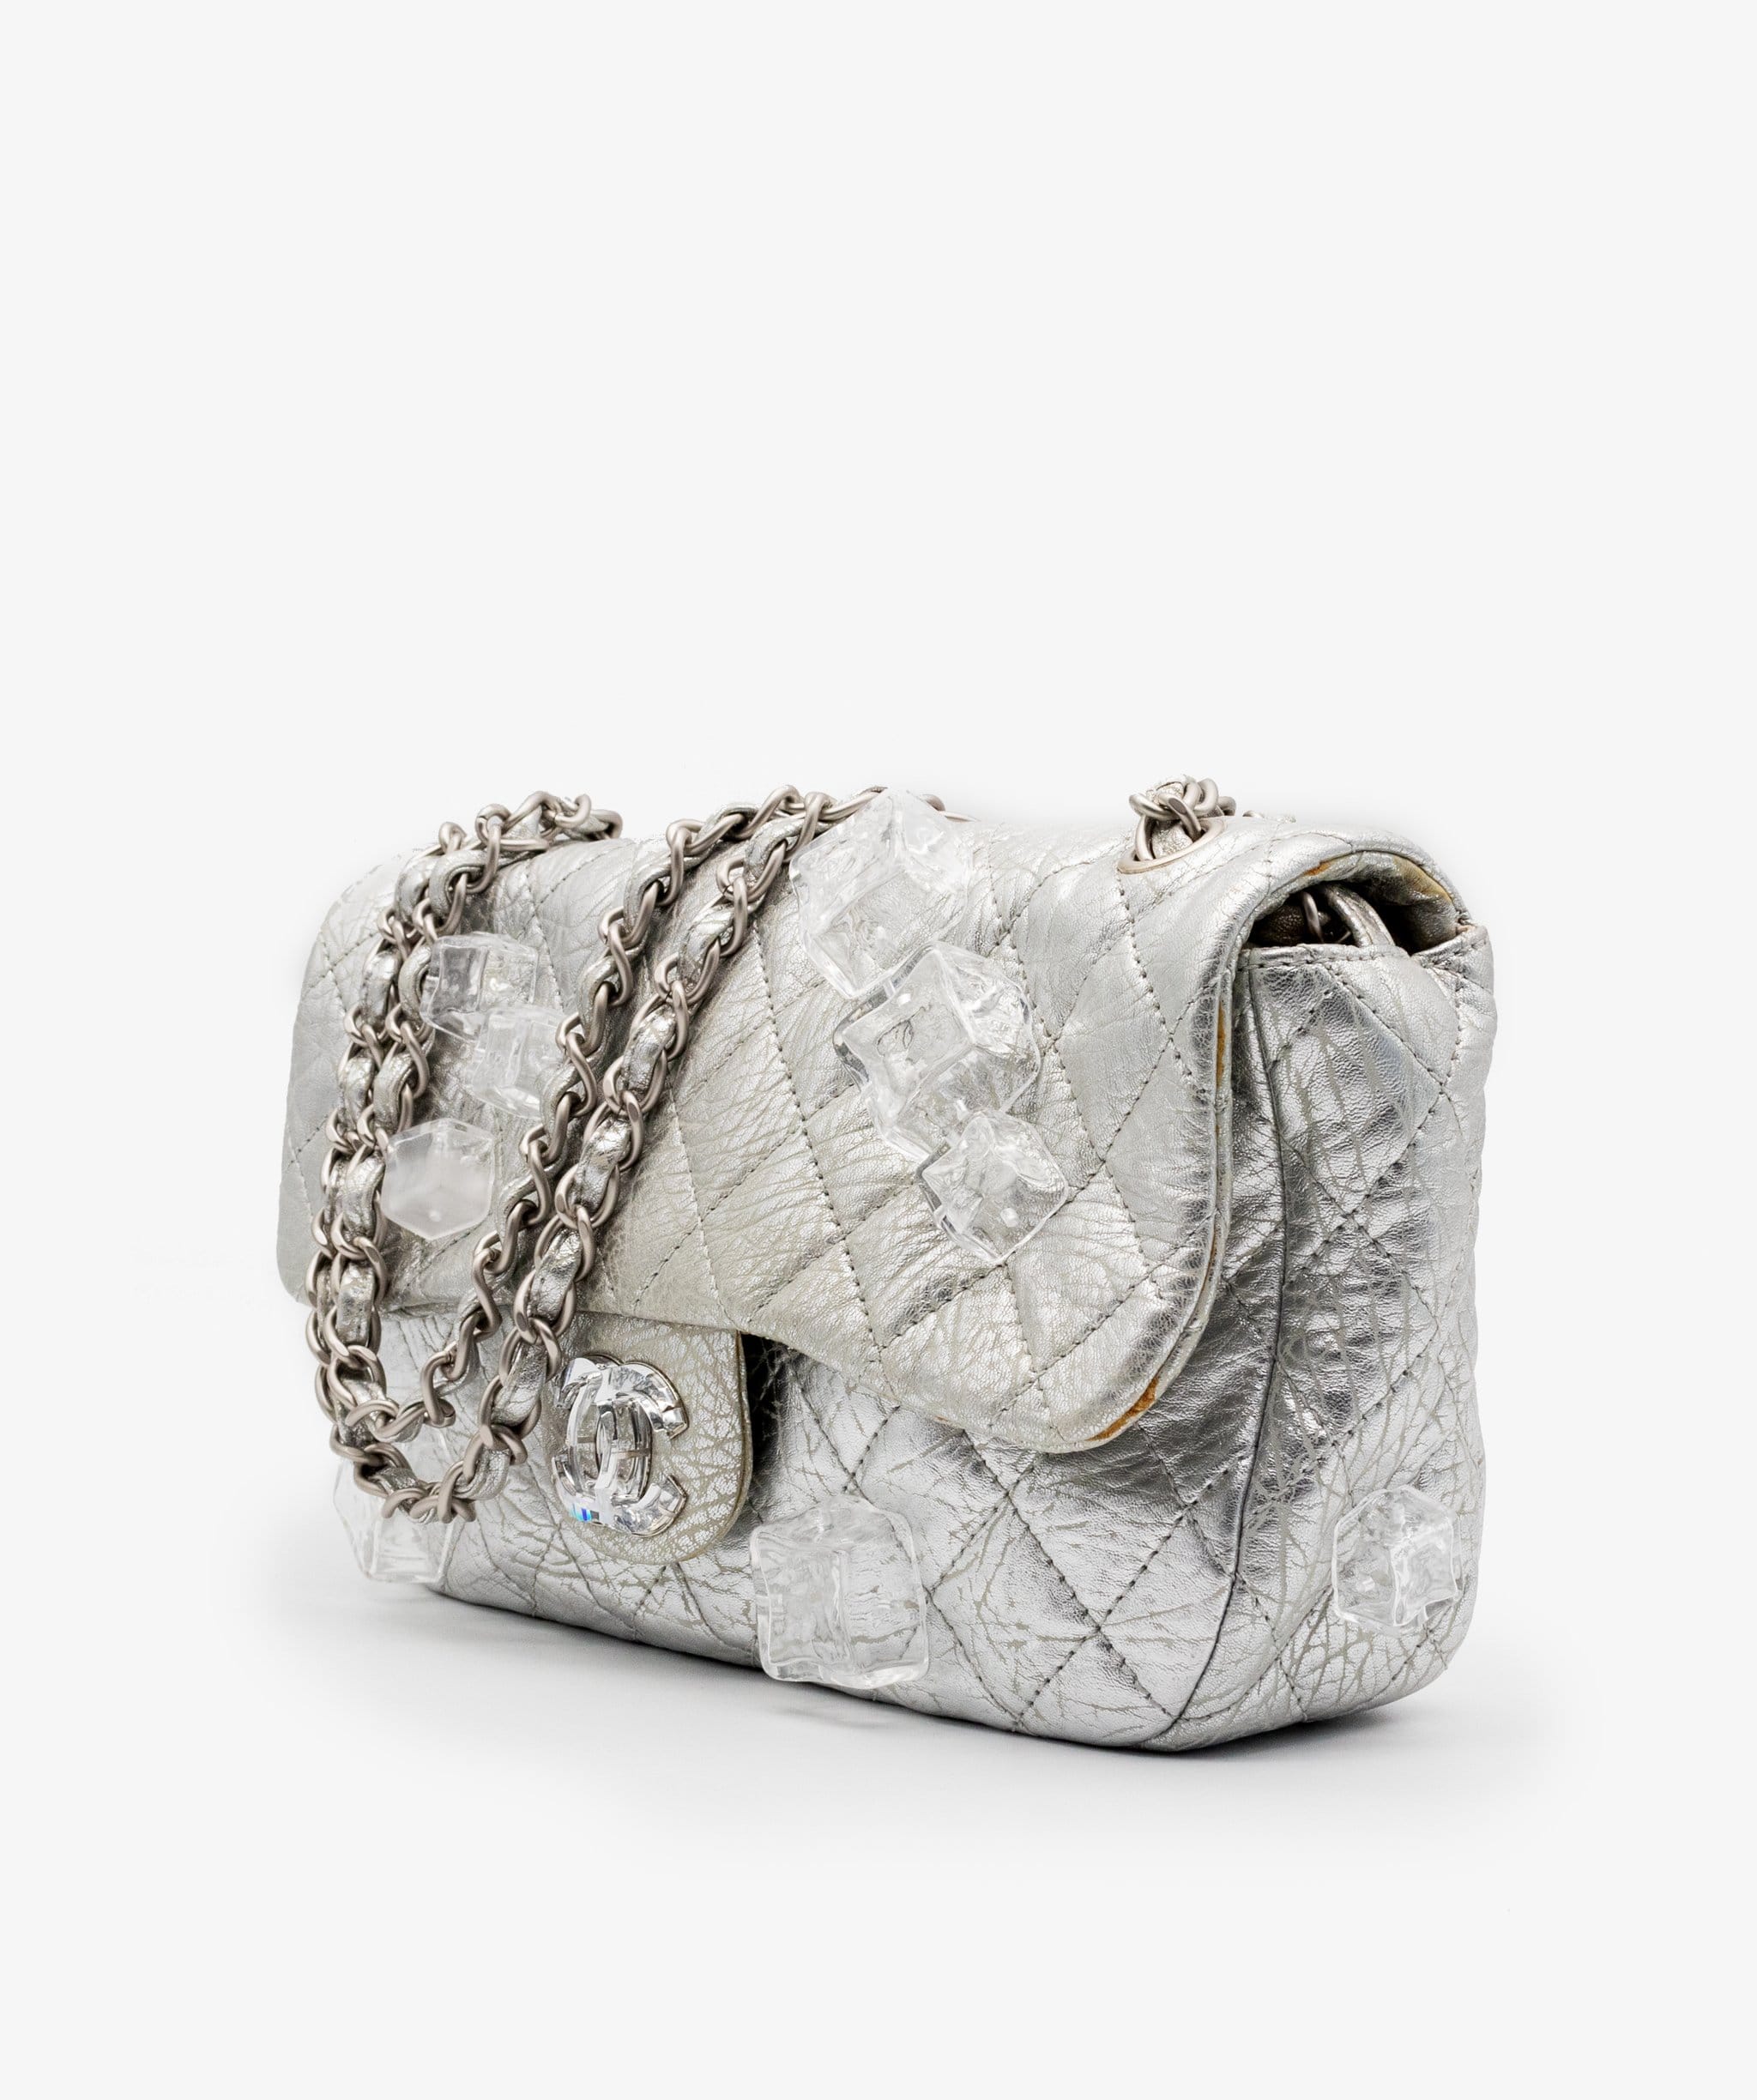 Chanel Chanel Classic Flap 2.55 Ice Cube On The Rocks Flapbag